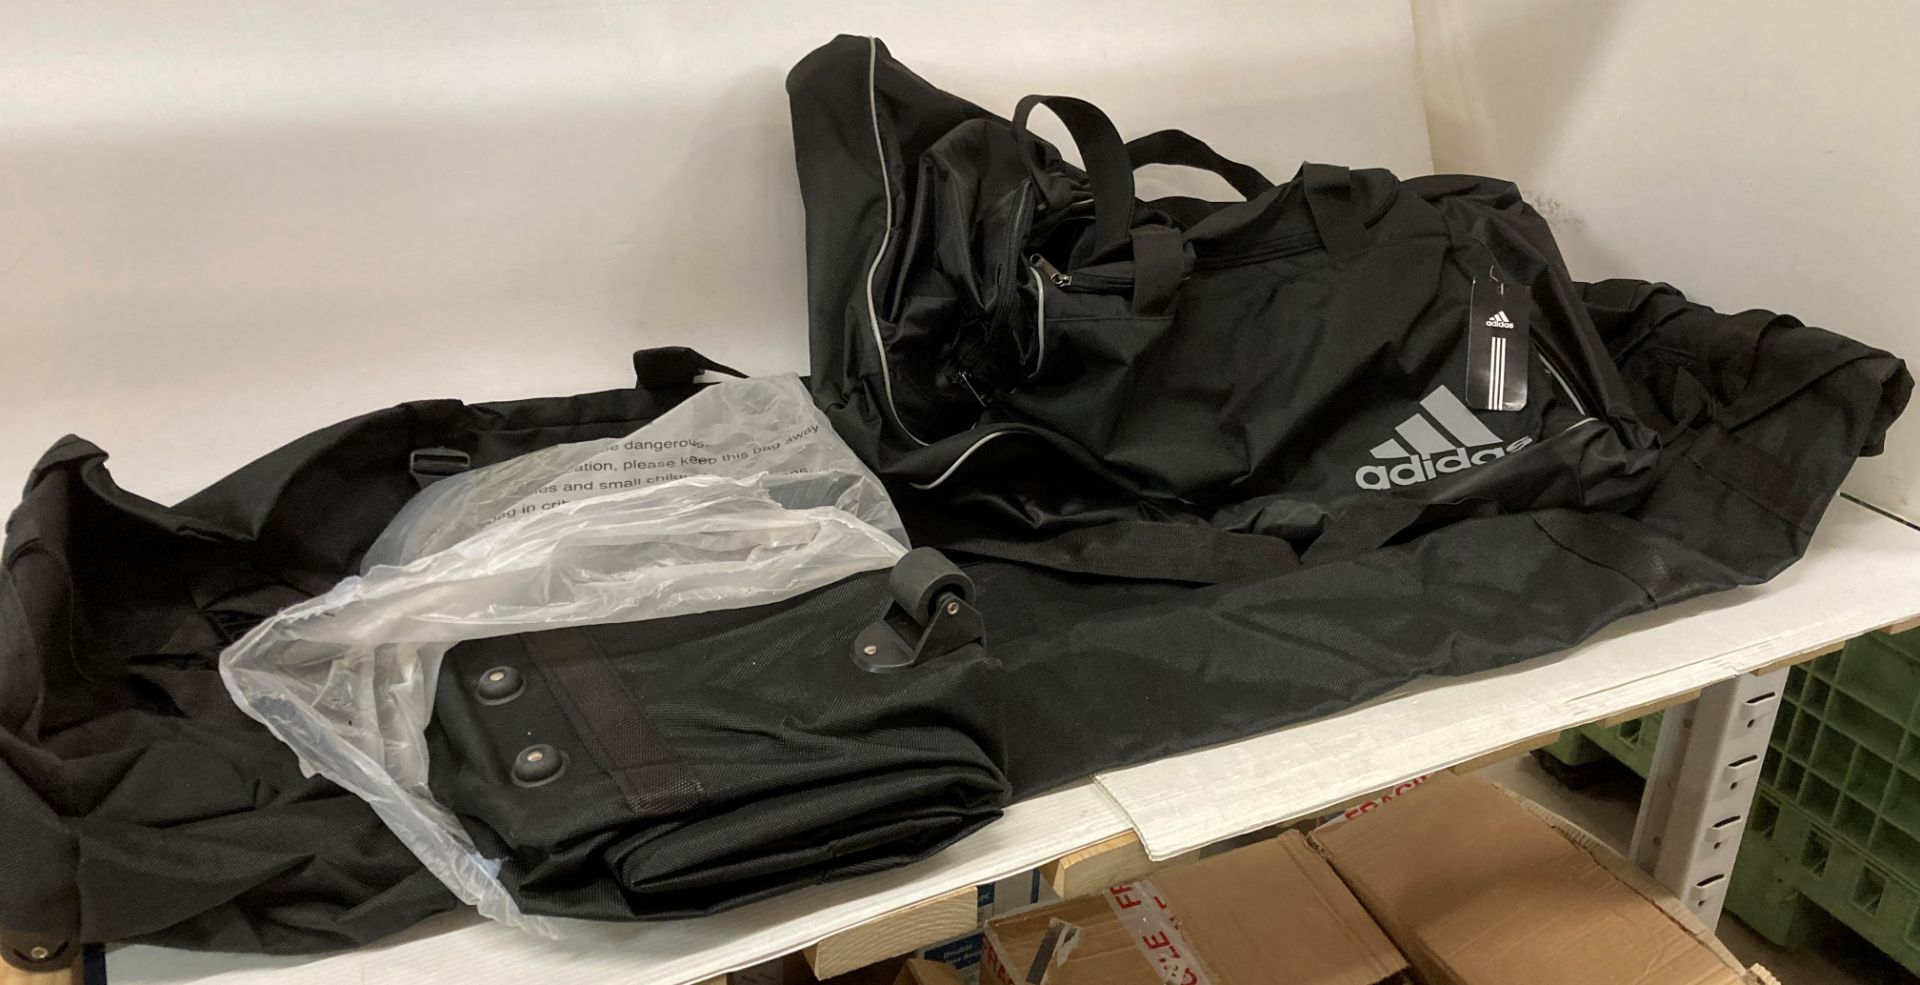 3 x items - 2 very large 3-wheeled pull along hold halls and a large Adidas holdall (E07)